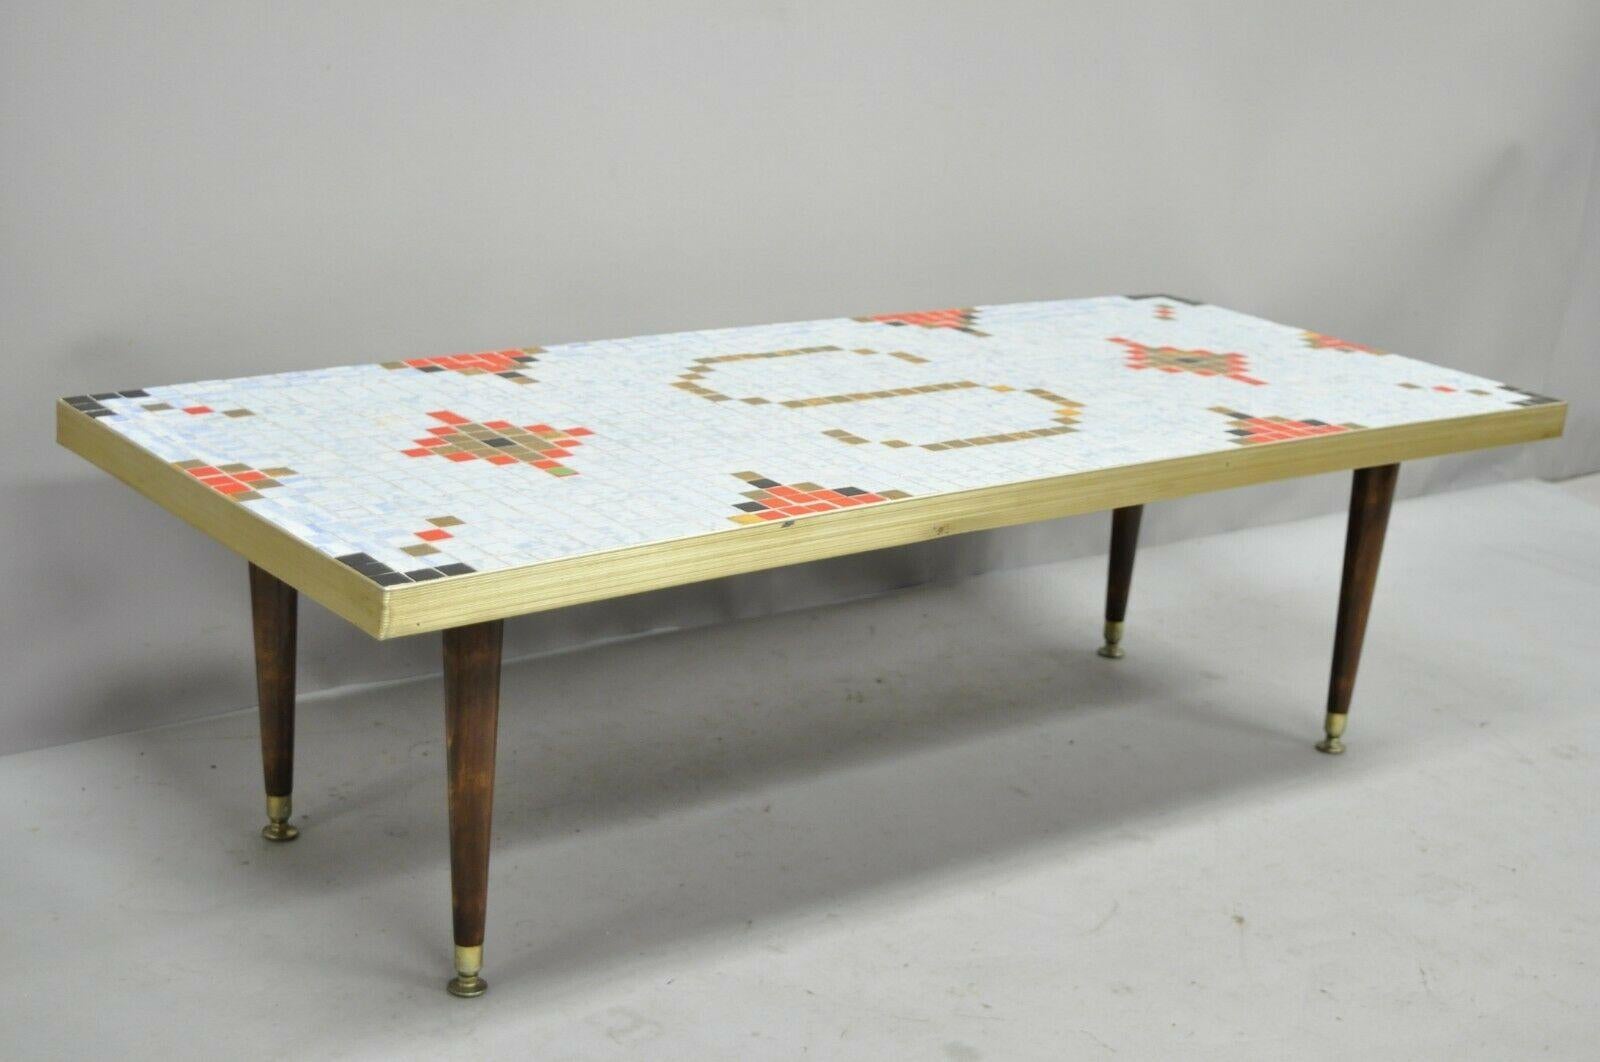 Porcelain Vintage Mid-Century Modern Mosaic Tile Top Coffee Table with 